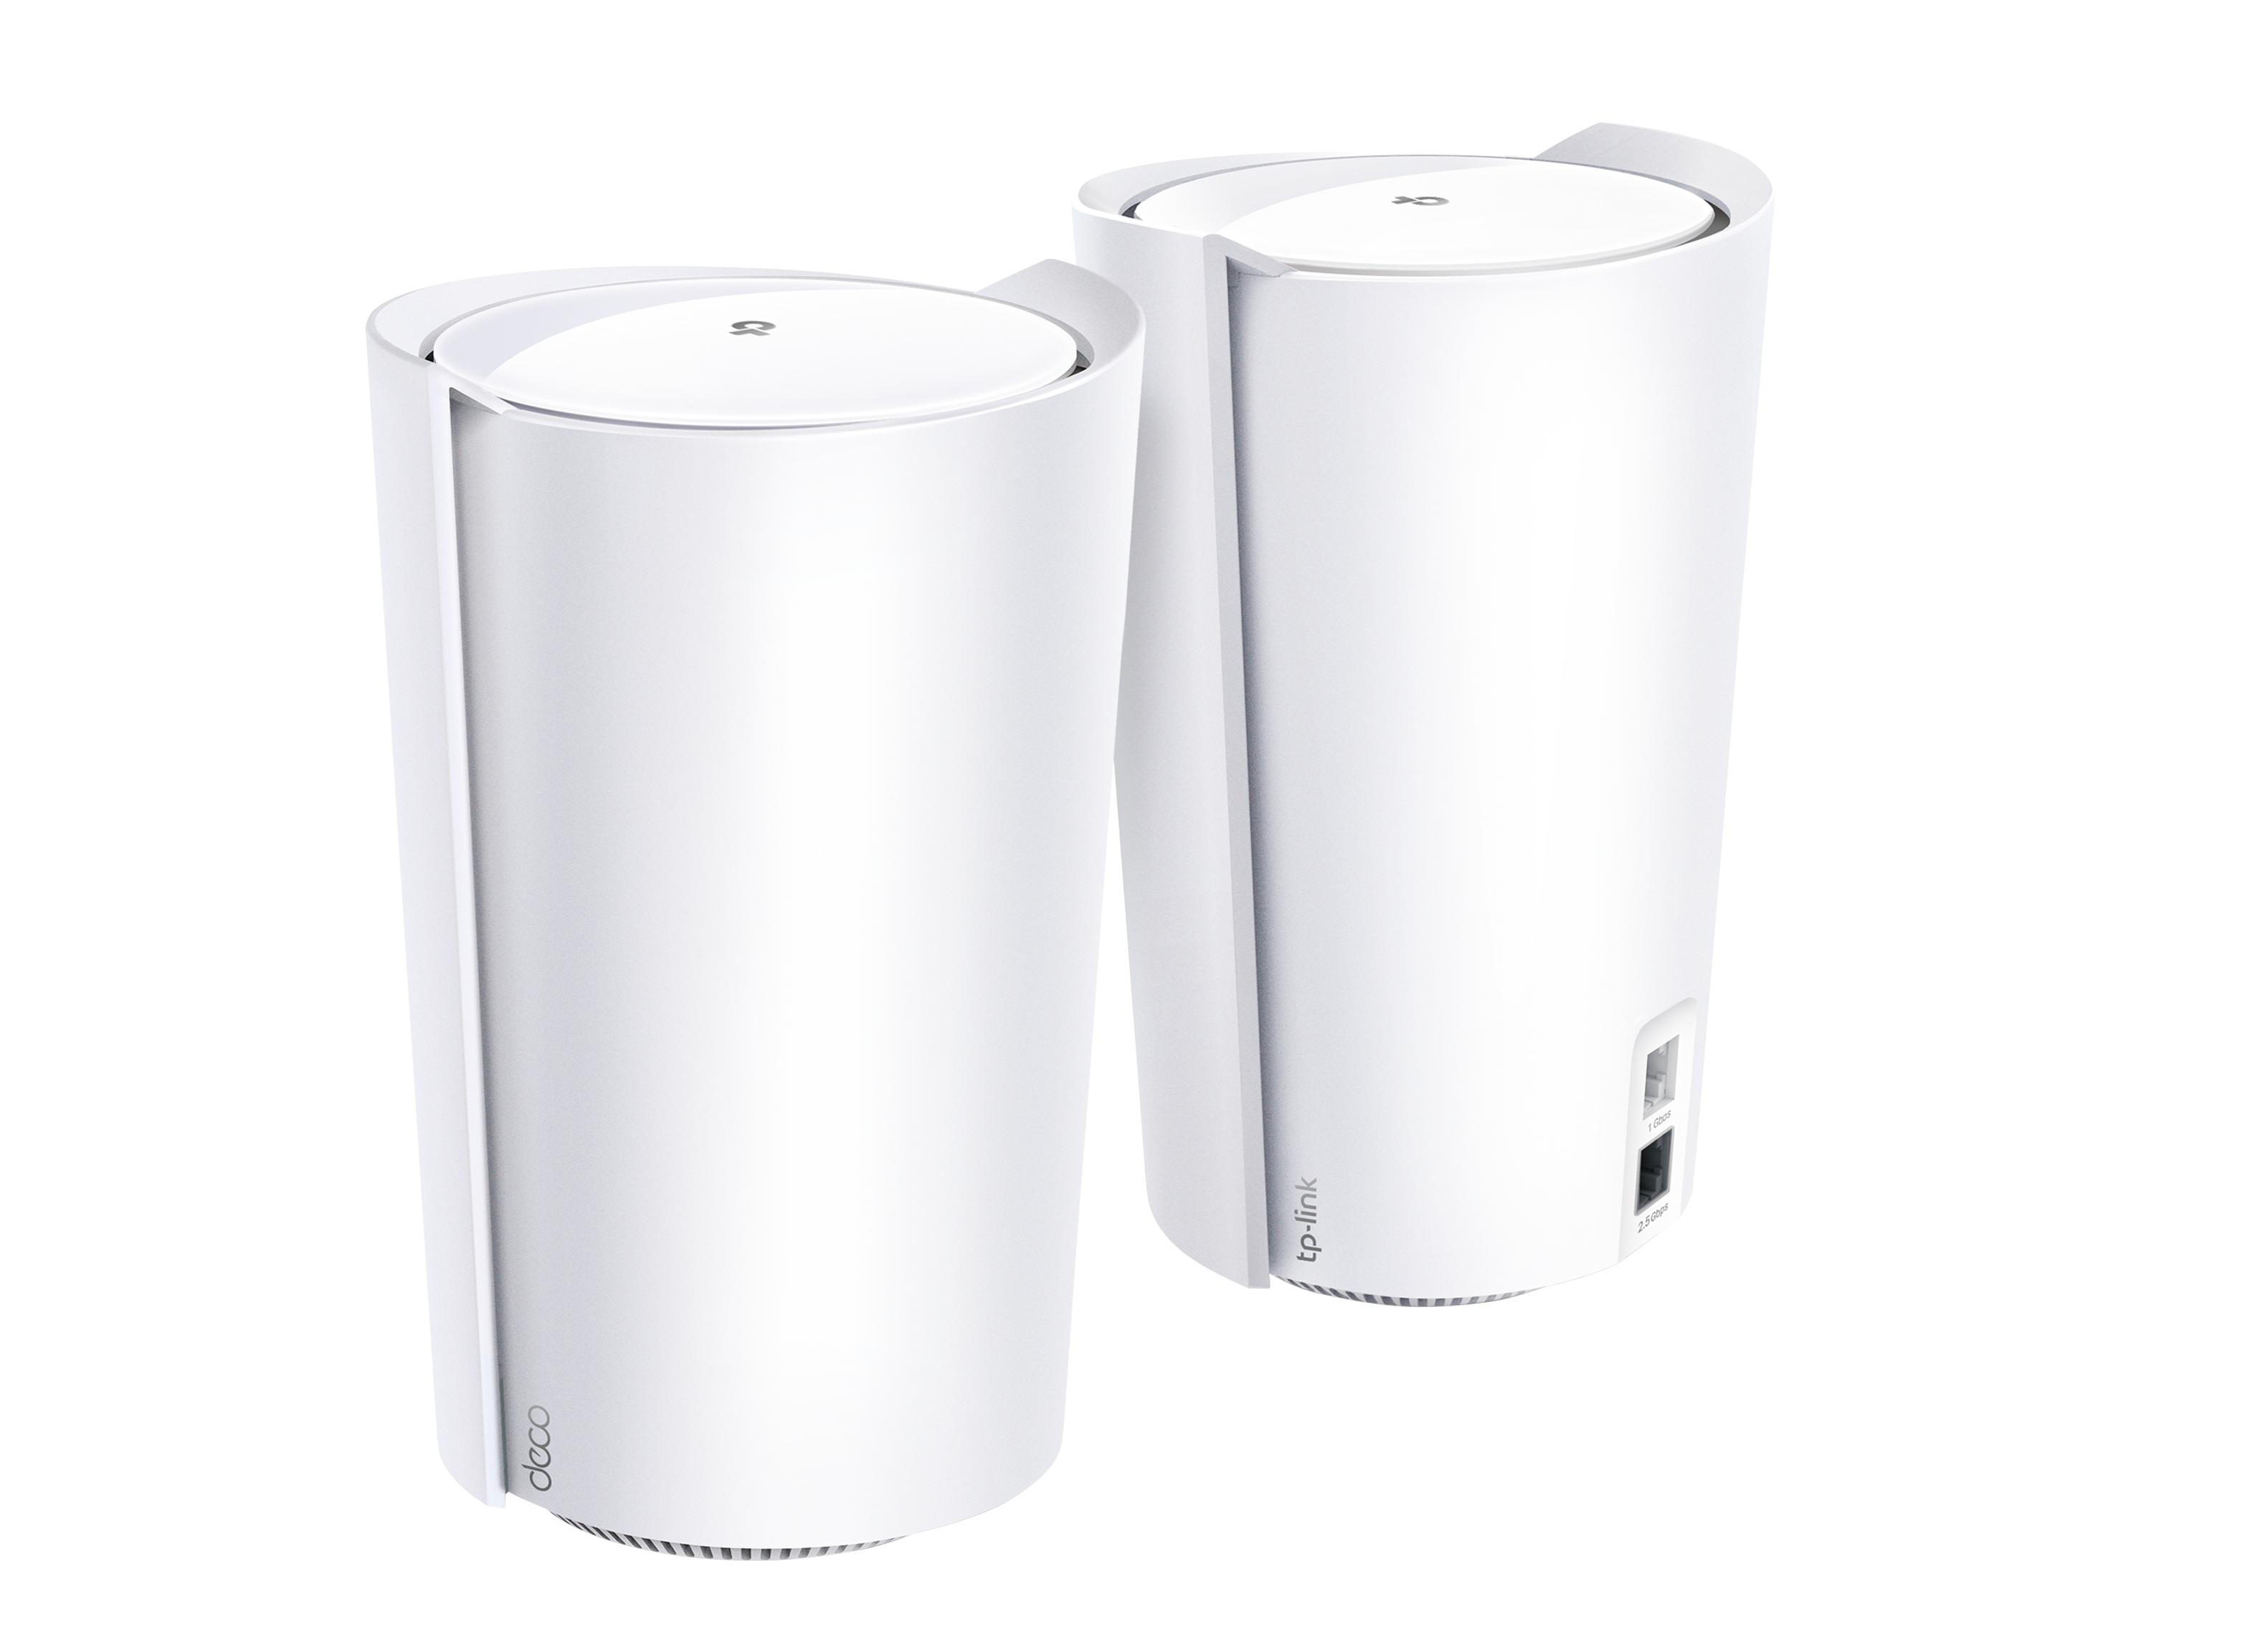 TP-Link Deco X90 AX6600 (2-Pack) Wireless Router Review - Consumer